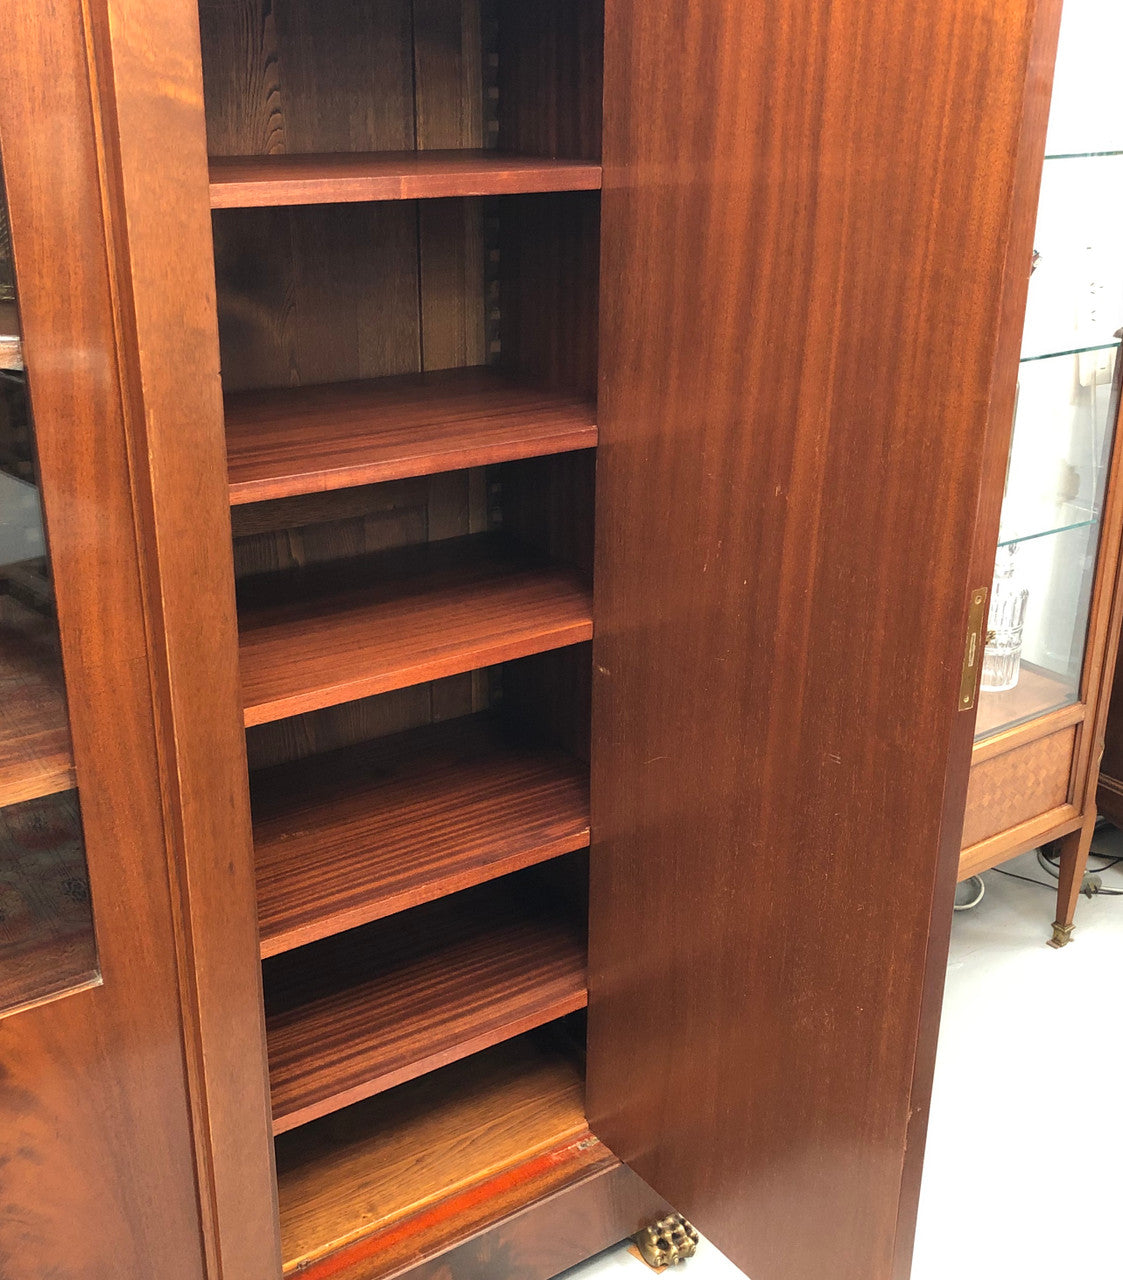 Superb Four Door French Empire Flame Mahogany Bookcase